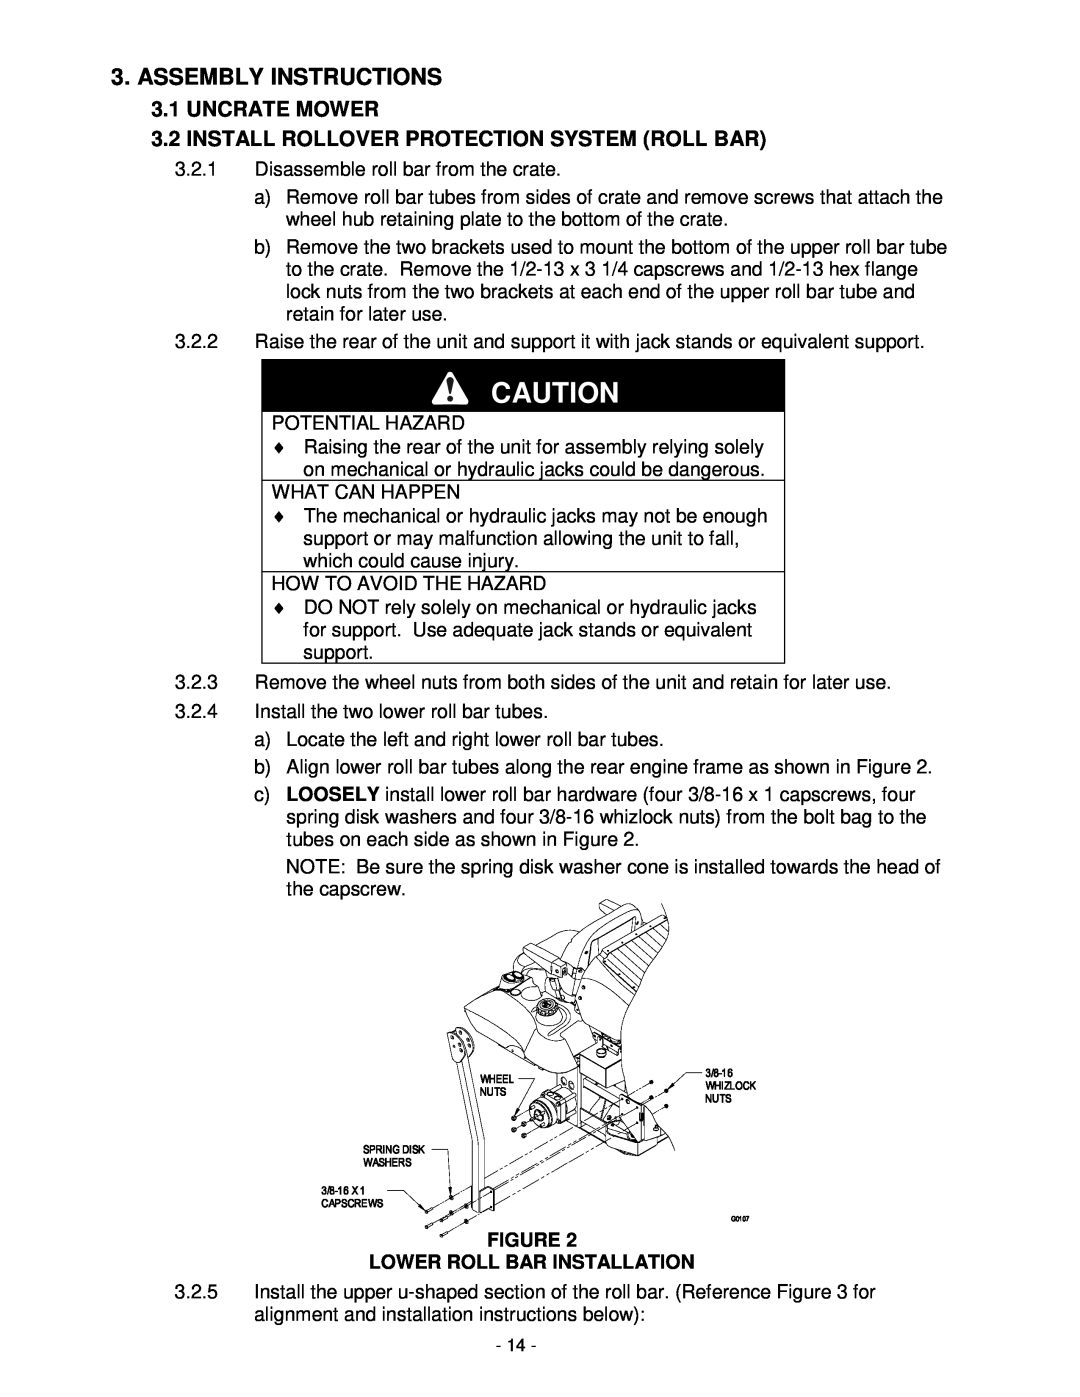 Exmark Lazer Z XP manual Assembly Instructions, UNCRATE MOWER 3.2 INSTALL ROLLOVER PROTECTION SYSTEM ROLL BAR 